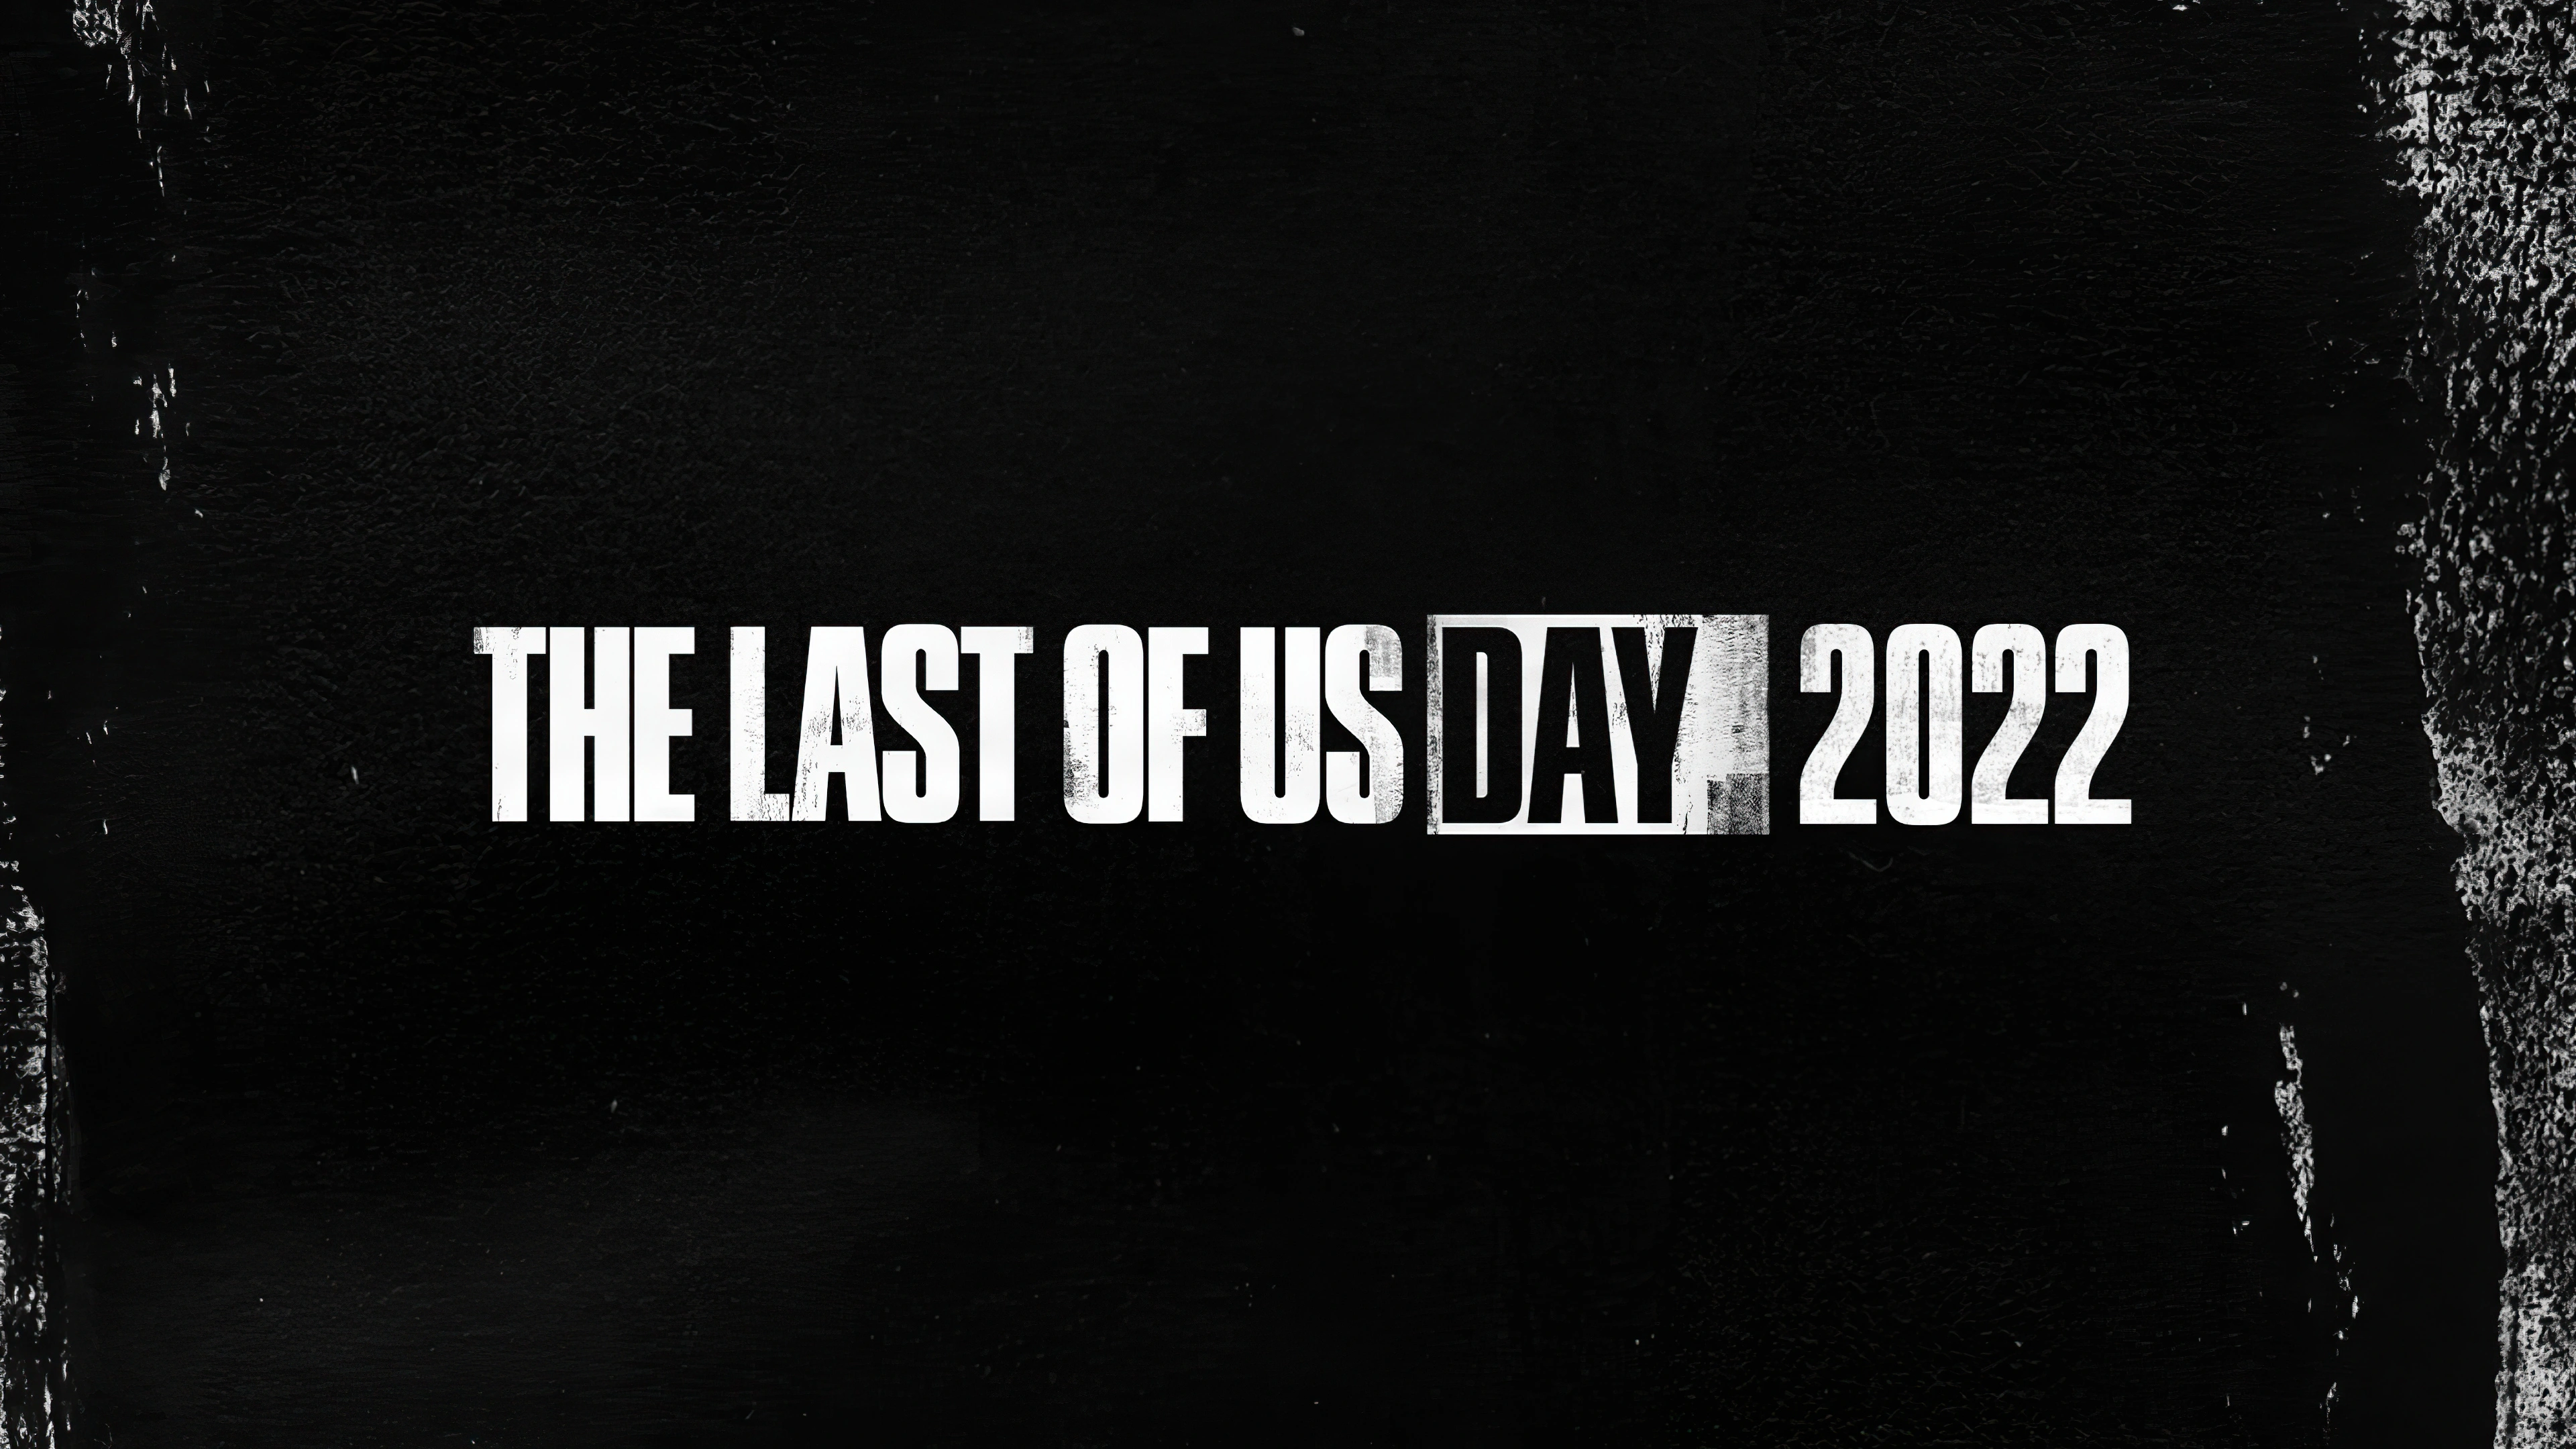 the last of us day 2022 s0.jpg